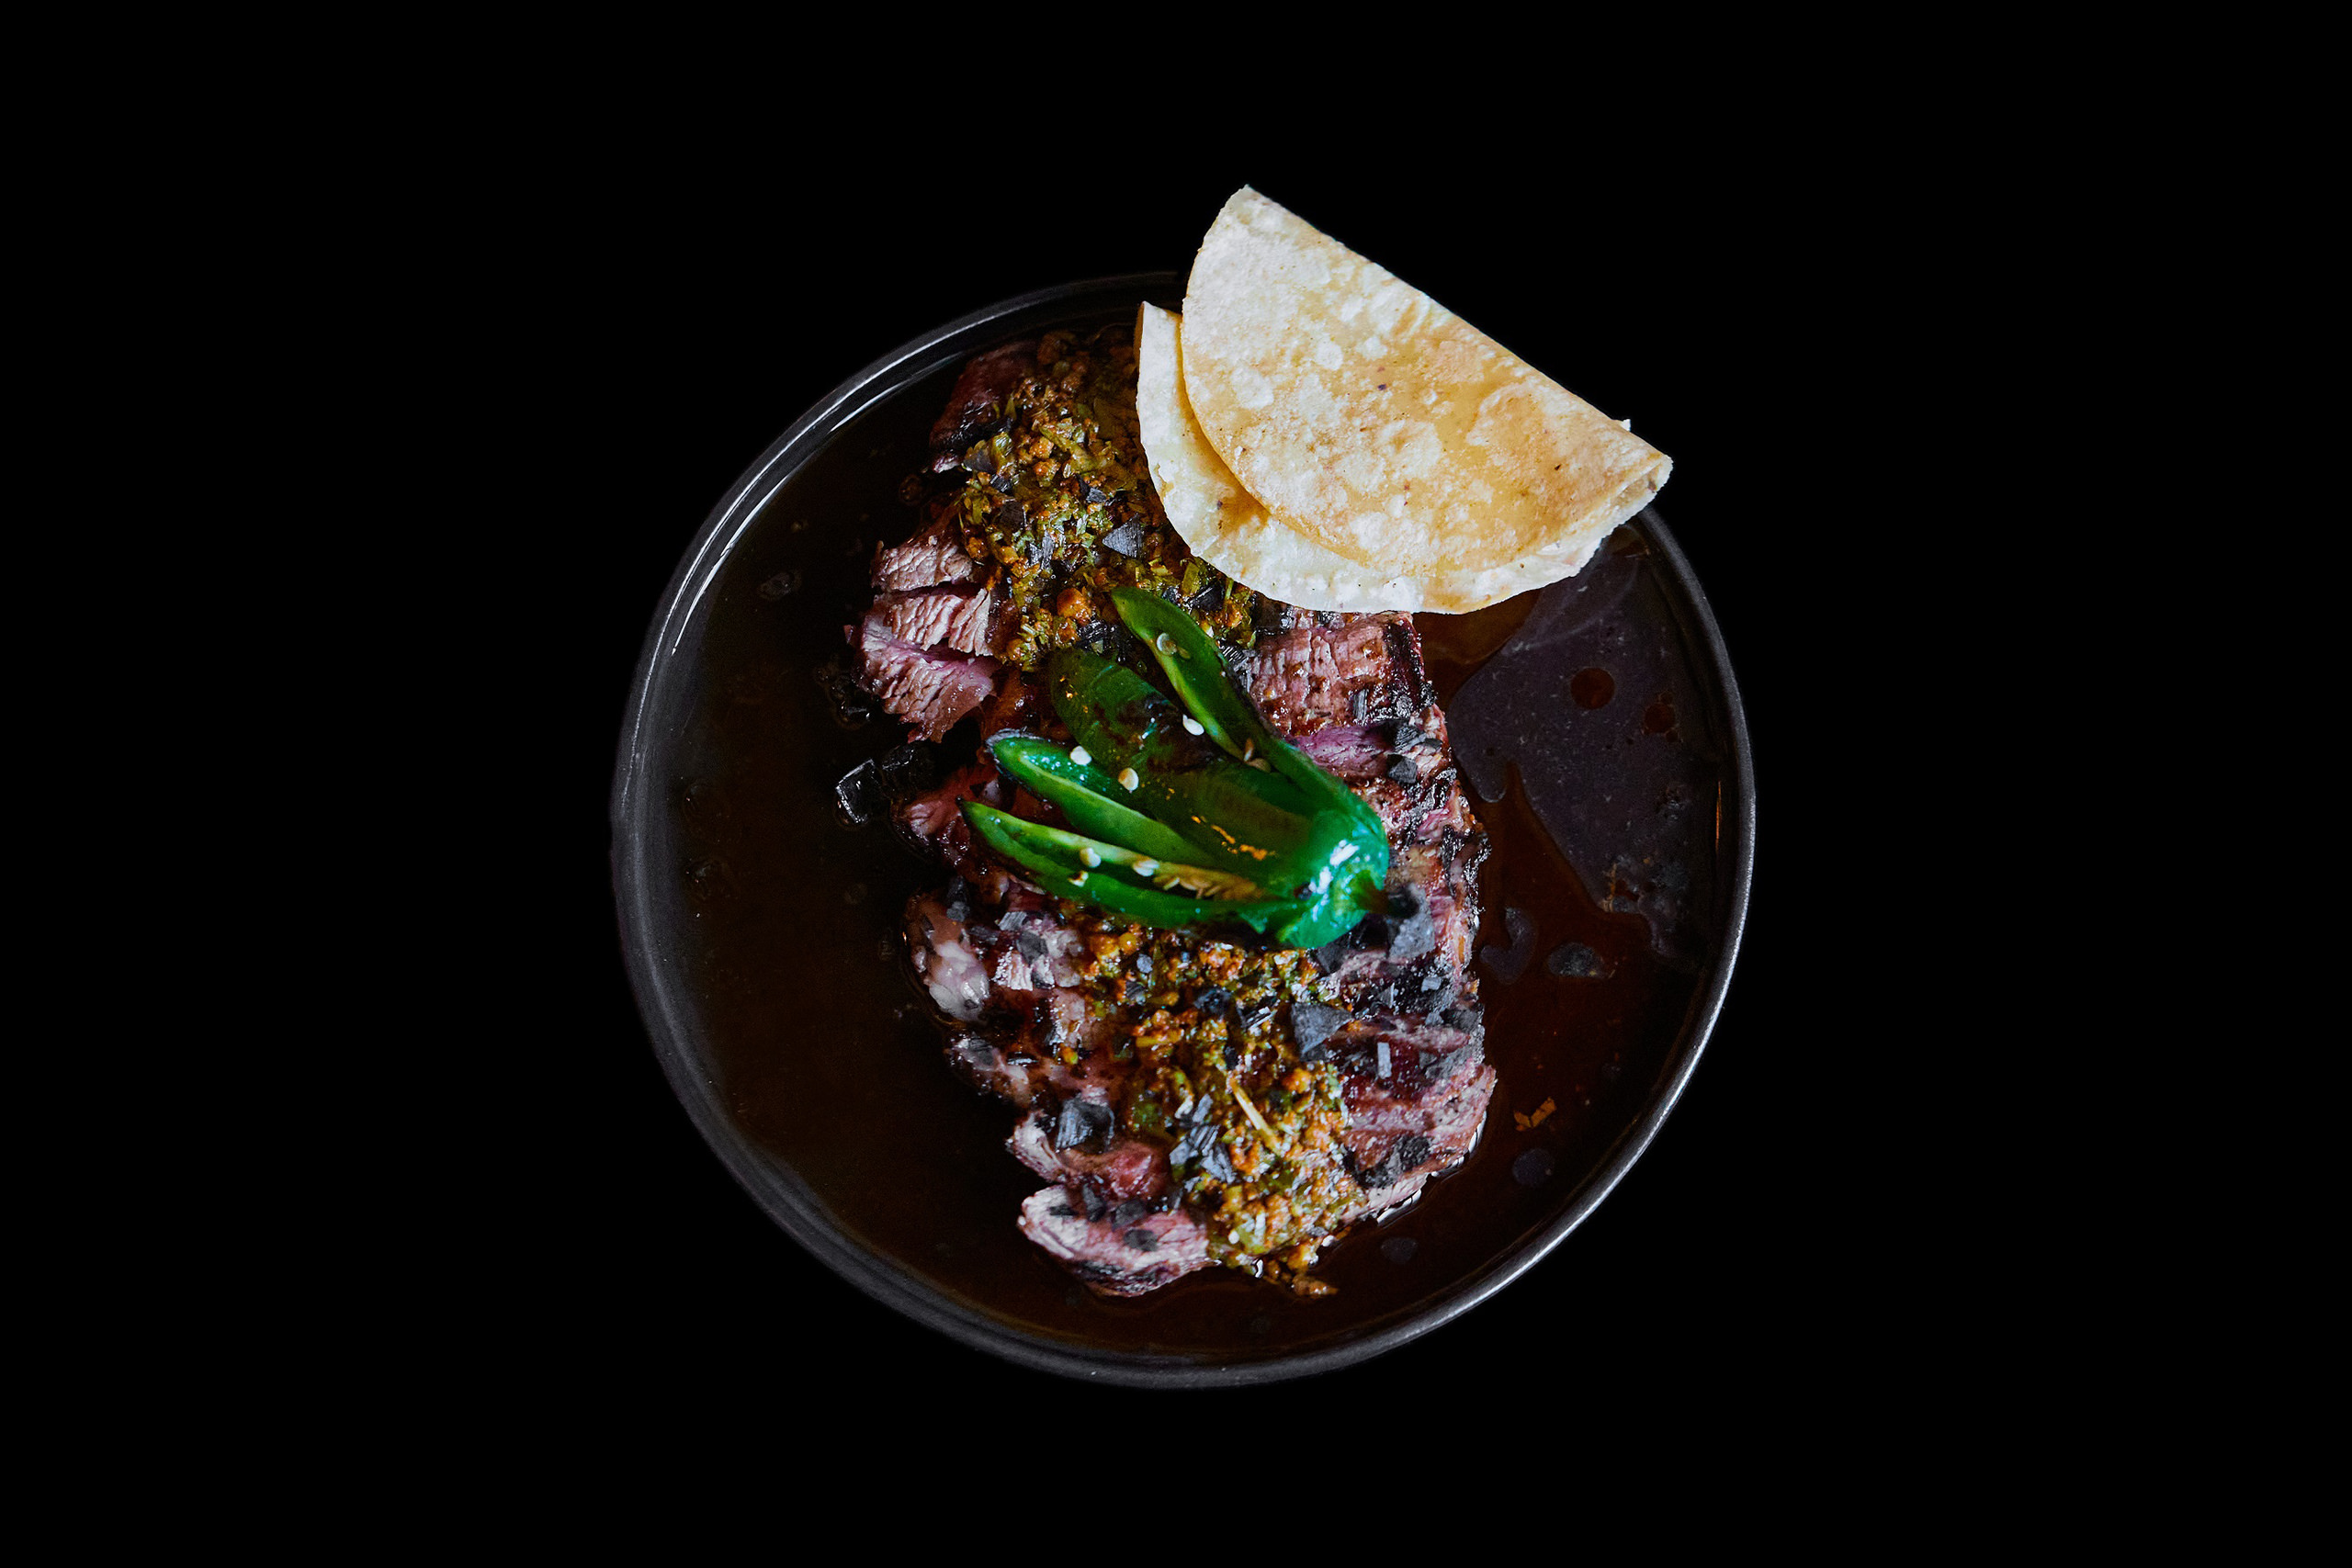 Build-your-own taco – wagyu scotch fillet, chimichurri, smoked paprika, grilled jalapeno and black salt at Carbón.